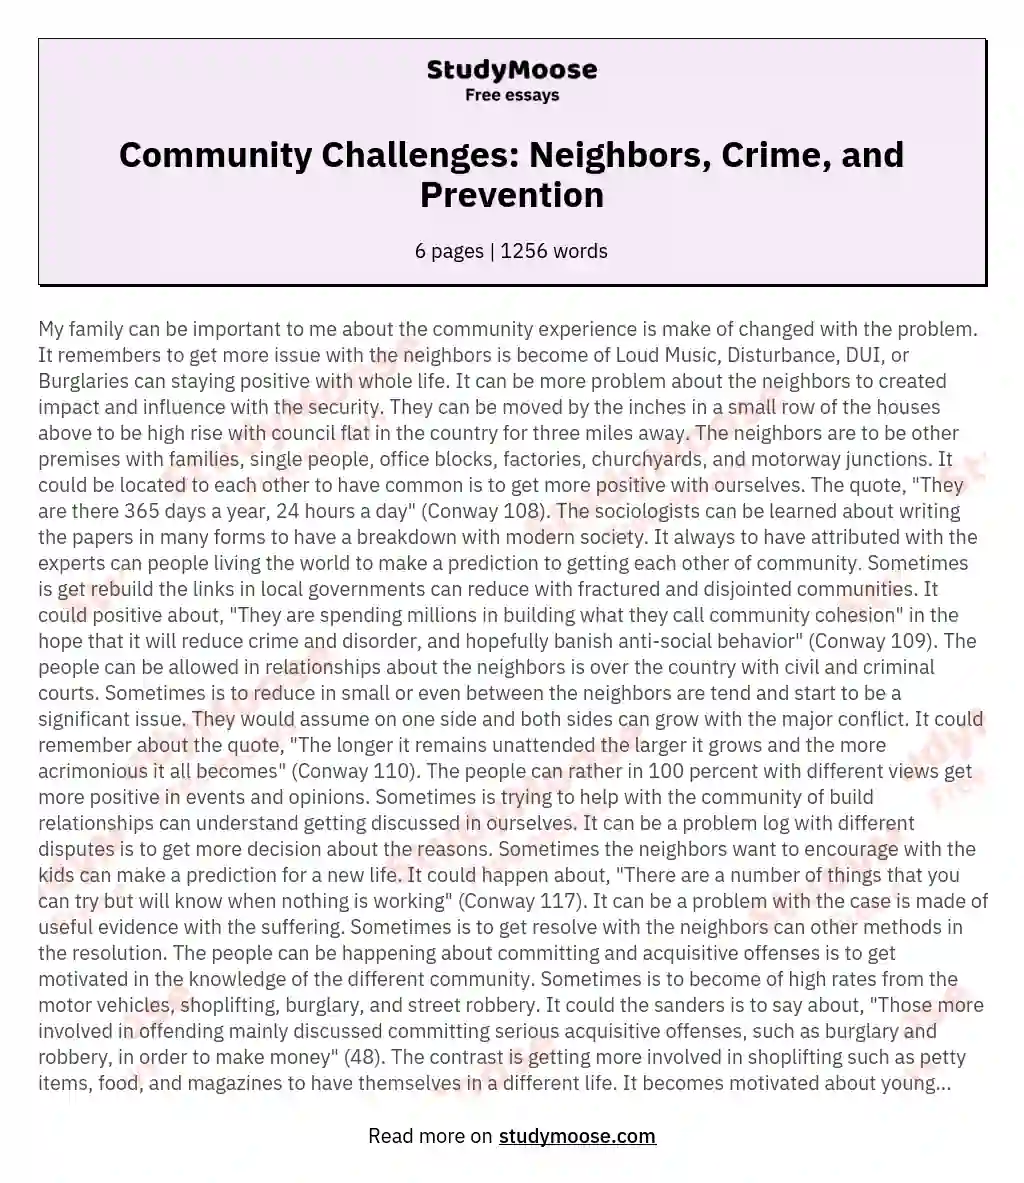 Community Challenges: Neighbors, Crime, and Prevention essay